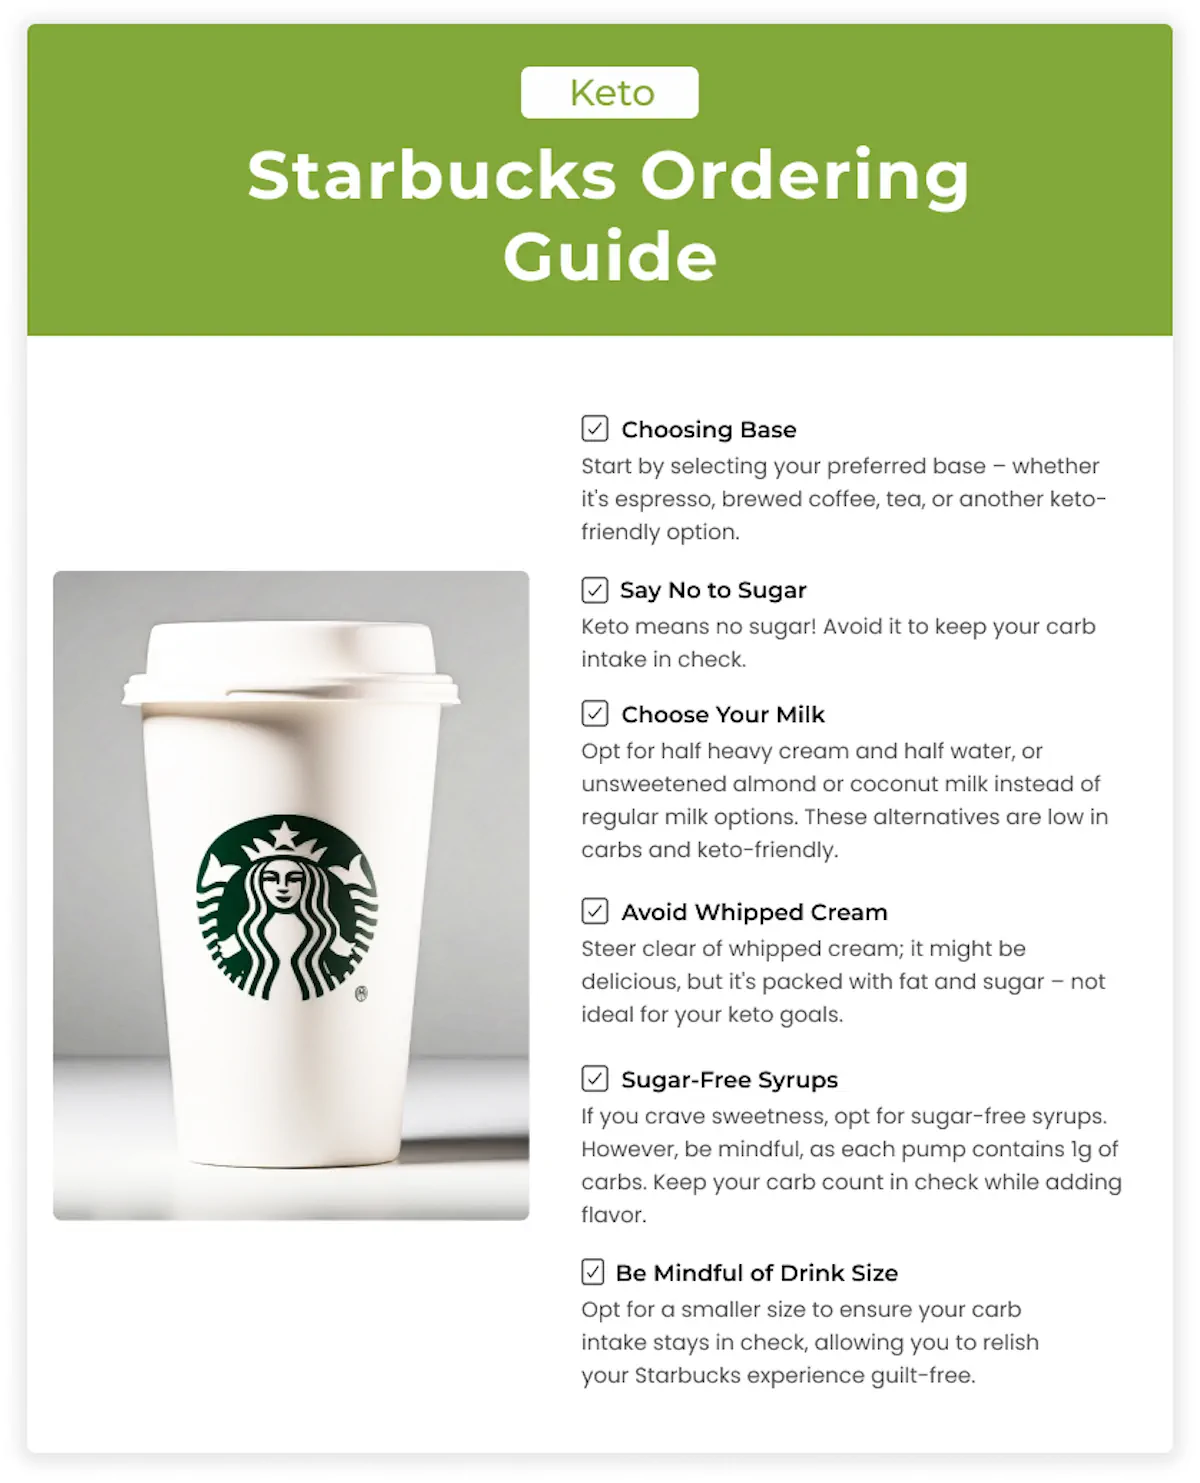 An image of Starbucks takeaway cup beside a list of things of things to do while ordering at Starbucks.